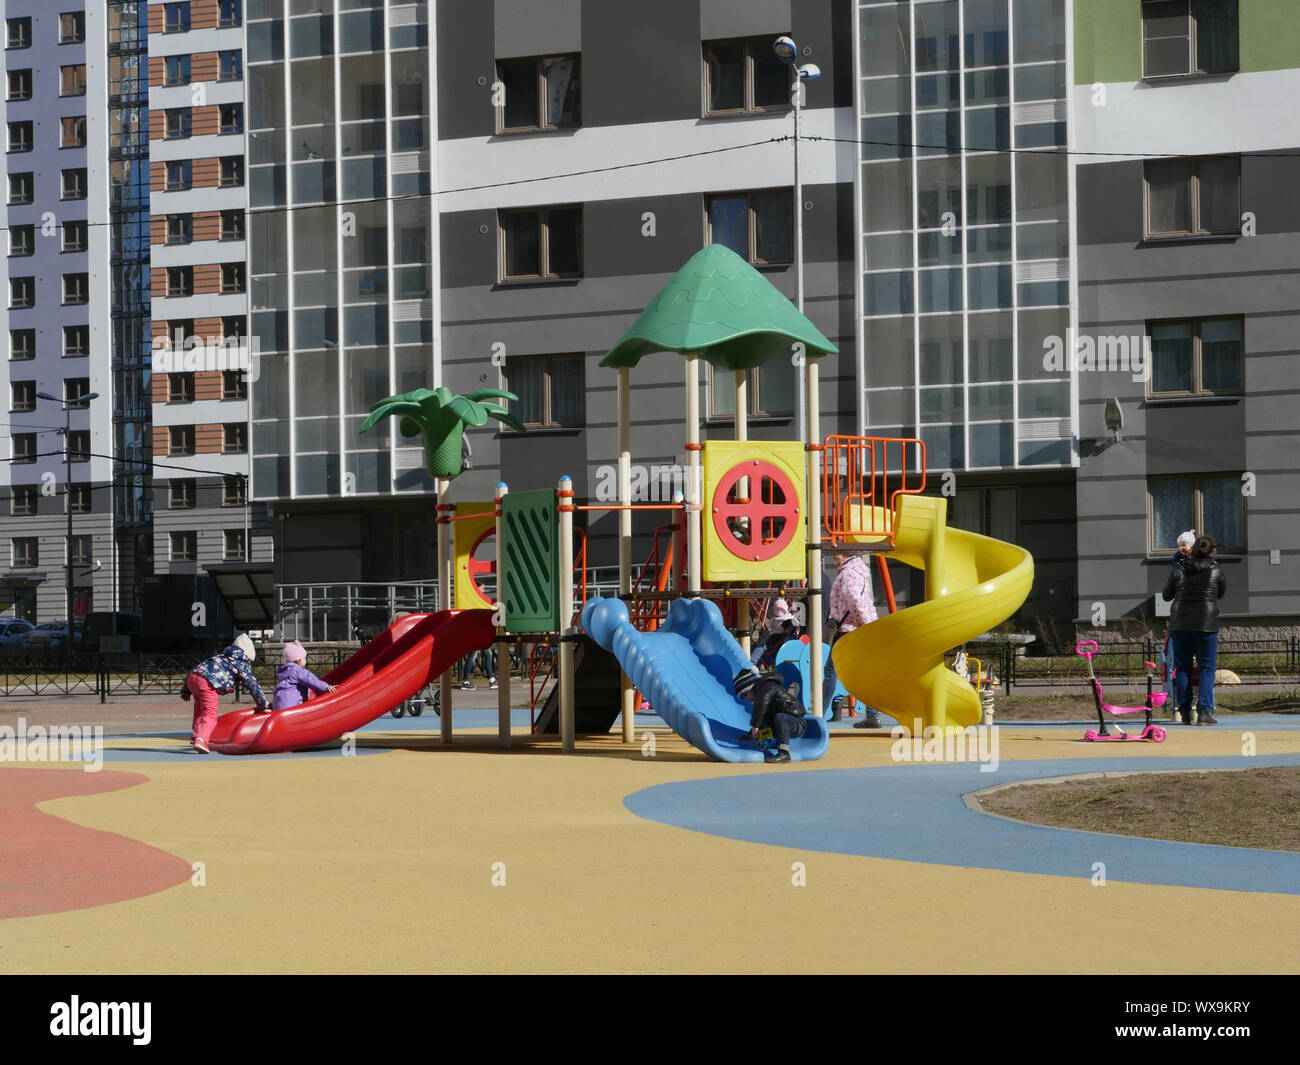 new residential buildings with a children's playground Stock Photo